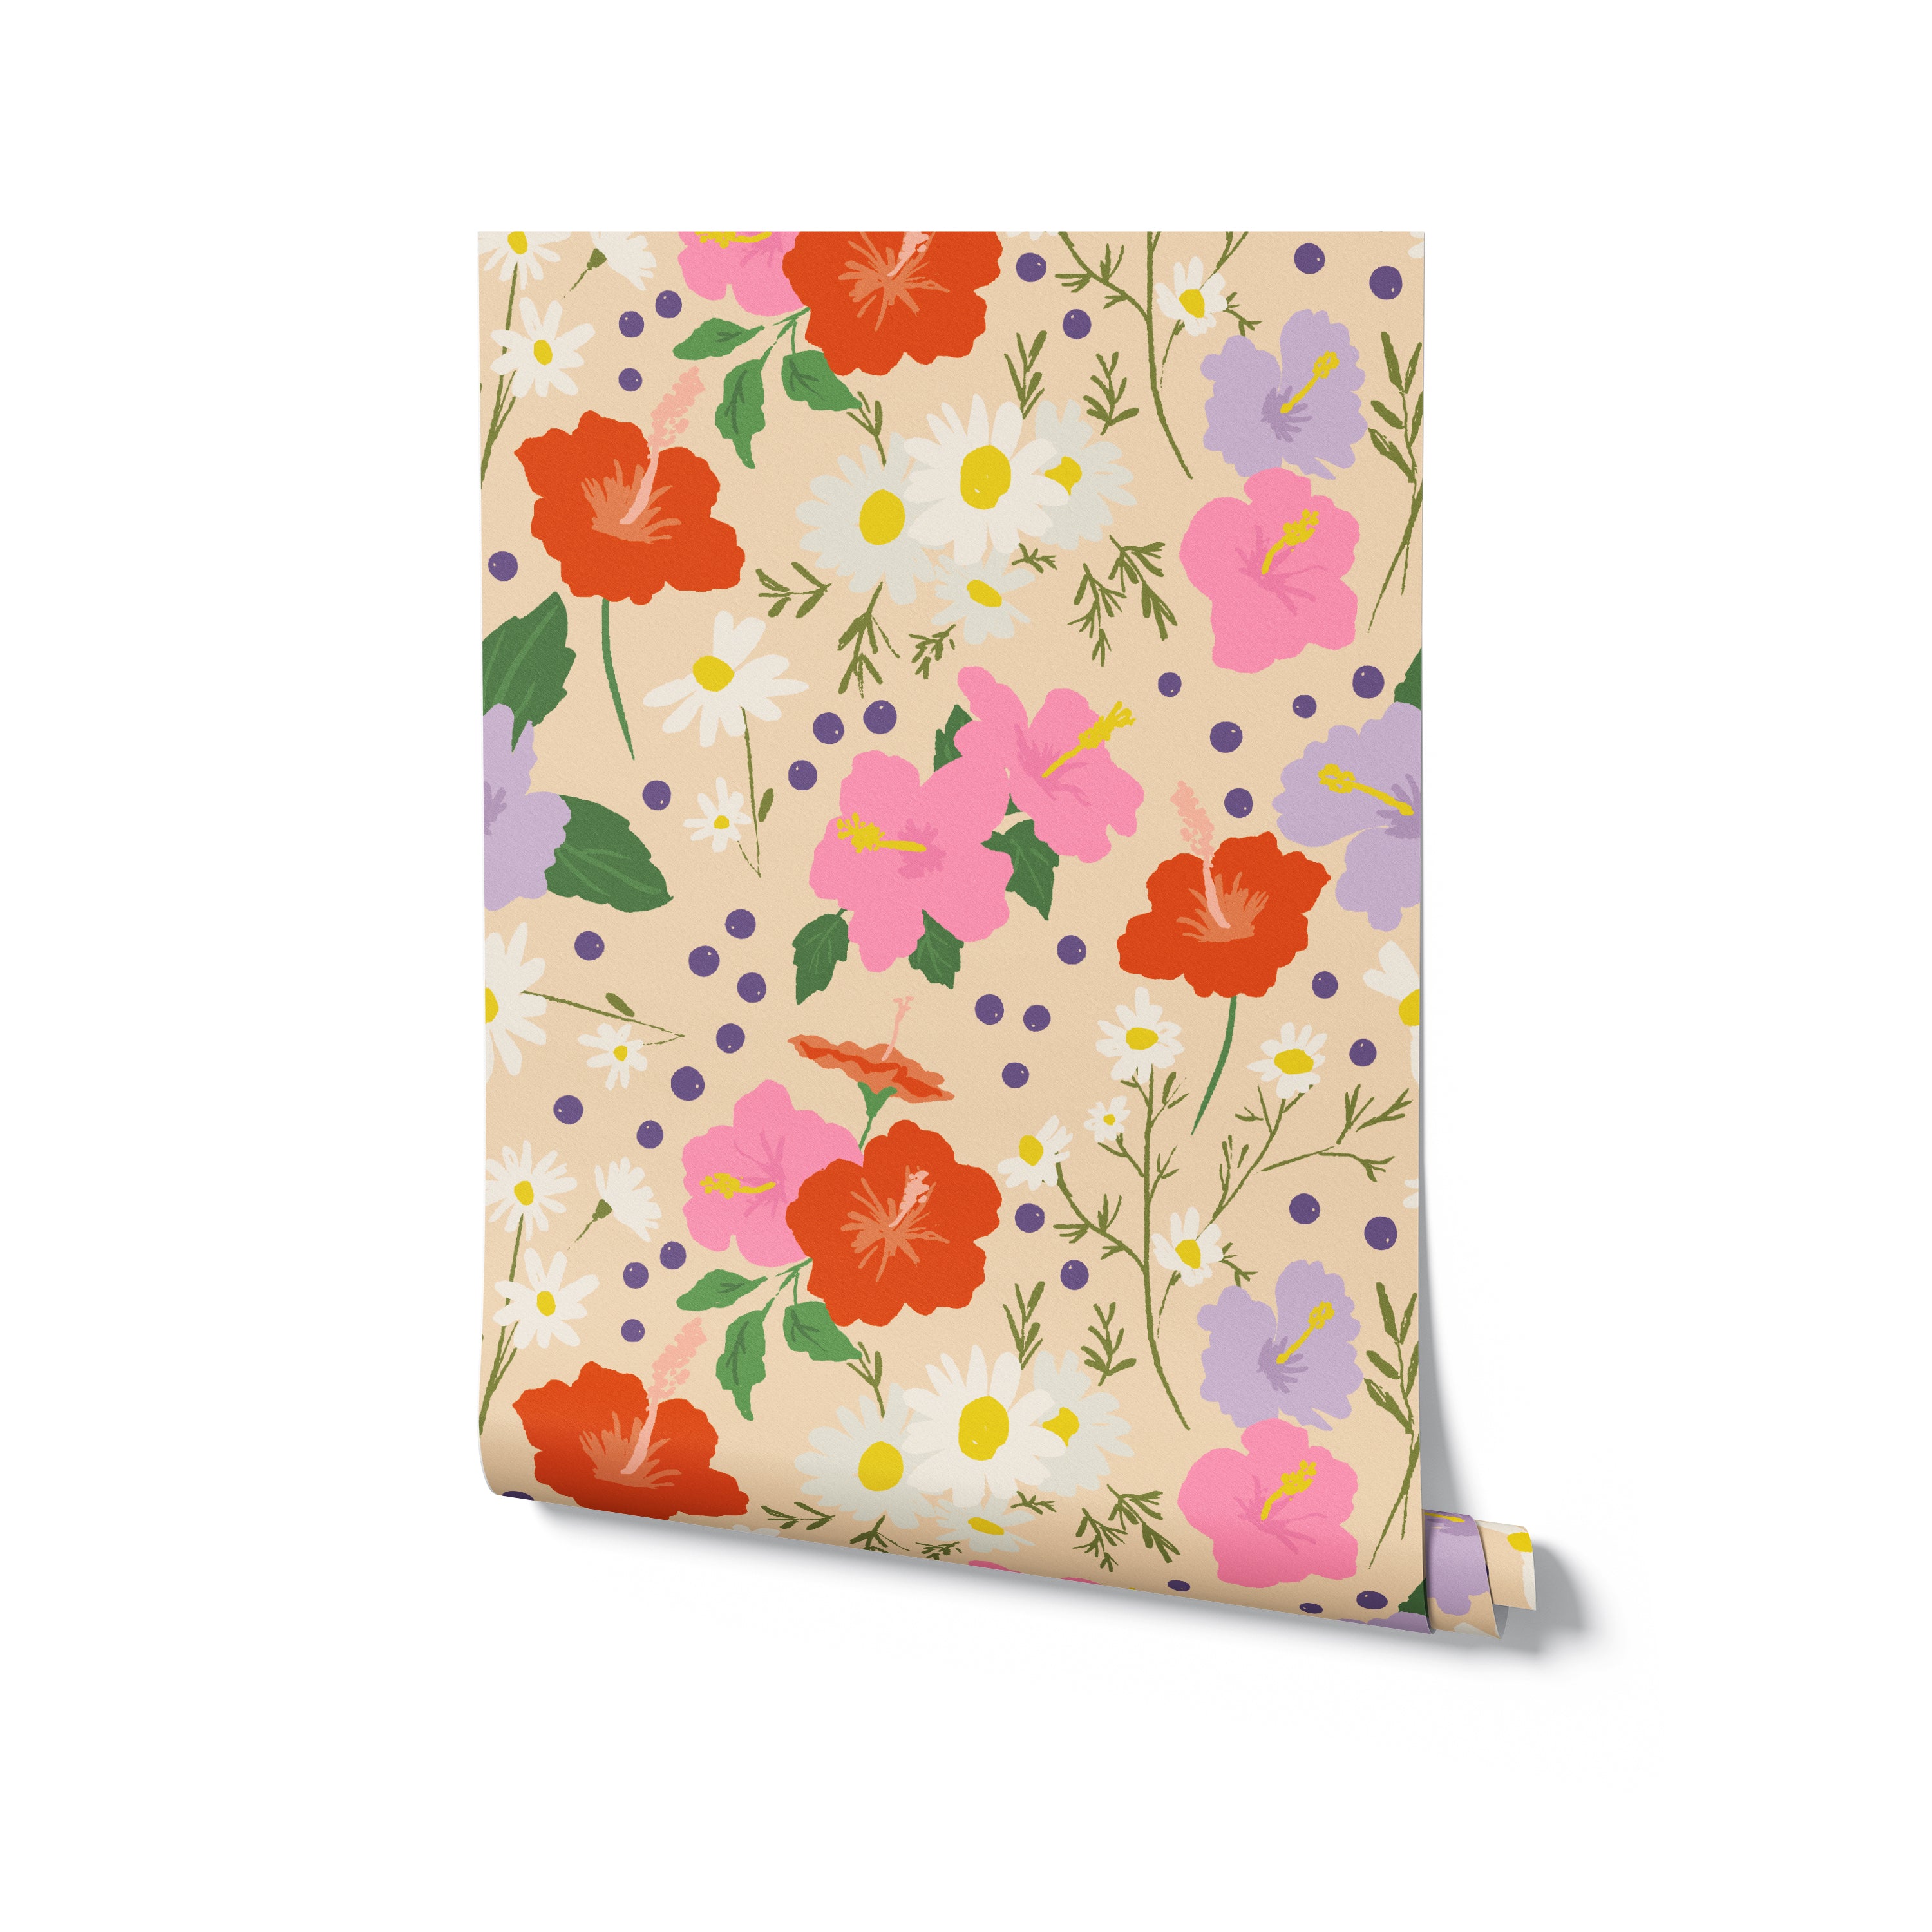 Rolled up wallpaper featuring a floral pattern with big red, pink, and violet flowers and smaller white daisies and decorative purple dots on a beige background, suggesting a vibrant and fresh design suitable for lively interior decor."